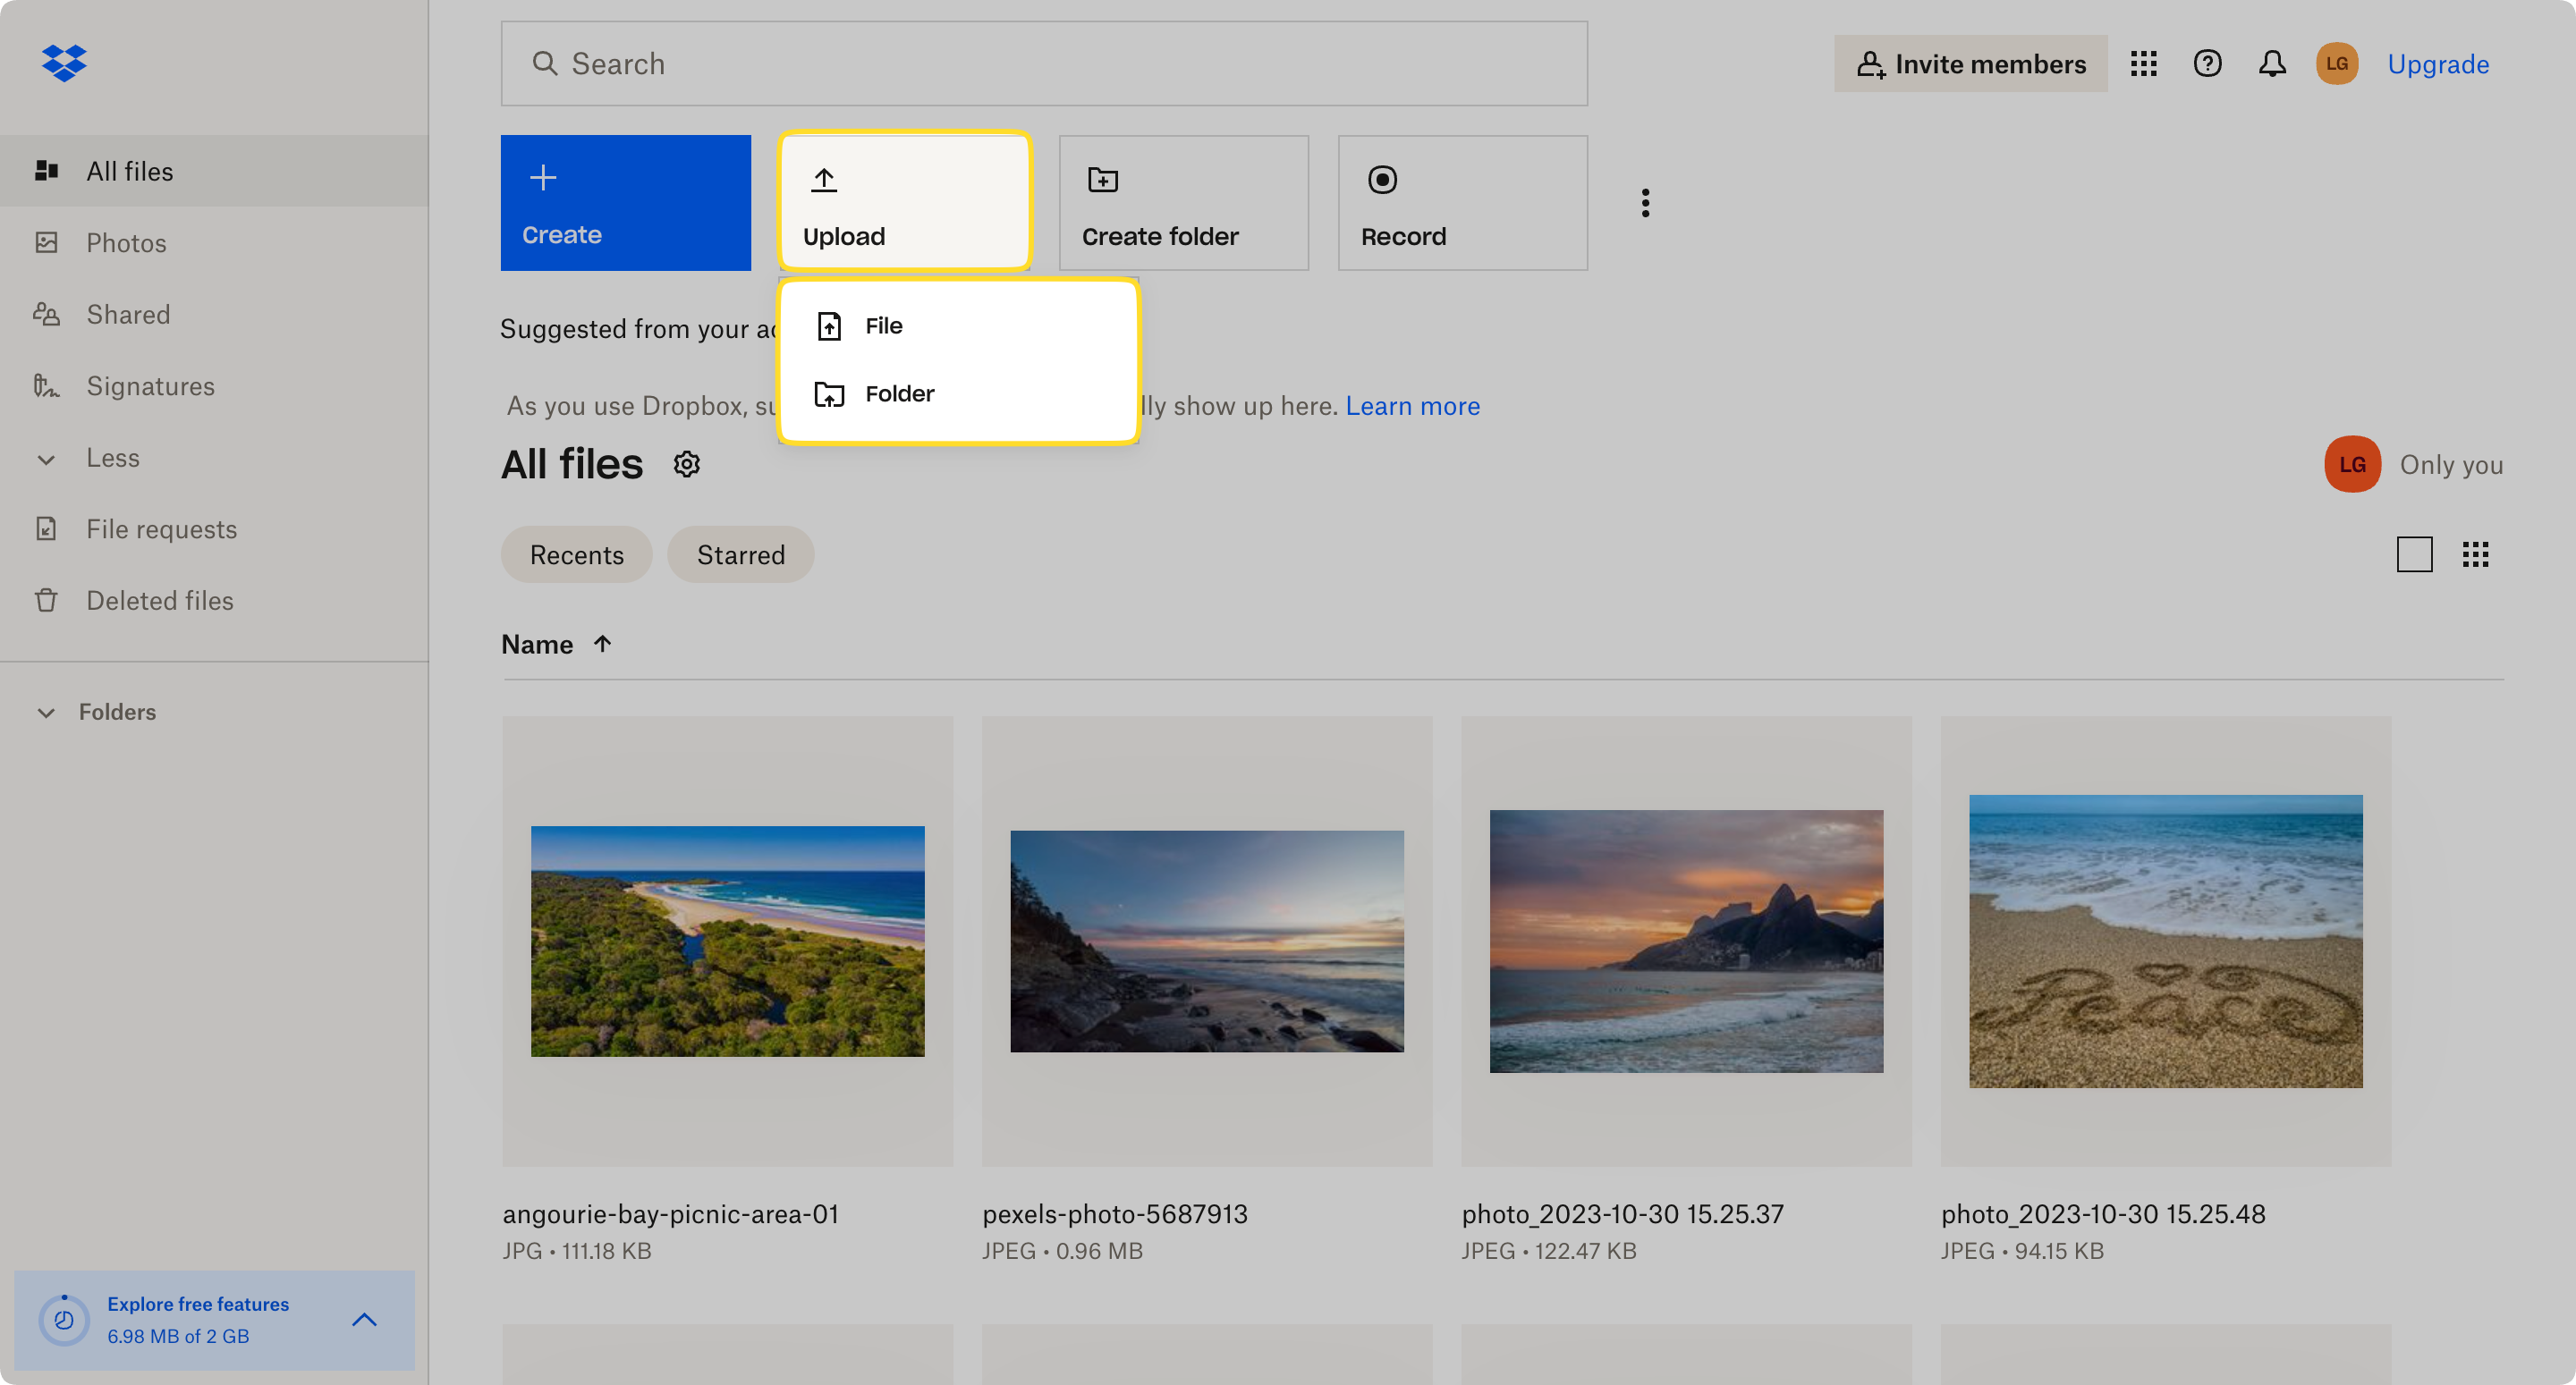 The Upload button and its options - File and Folder - are demonstrated at the Dropbox dashboard.